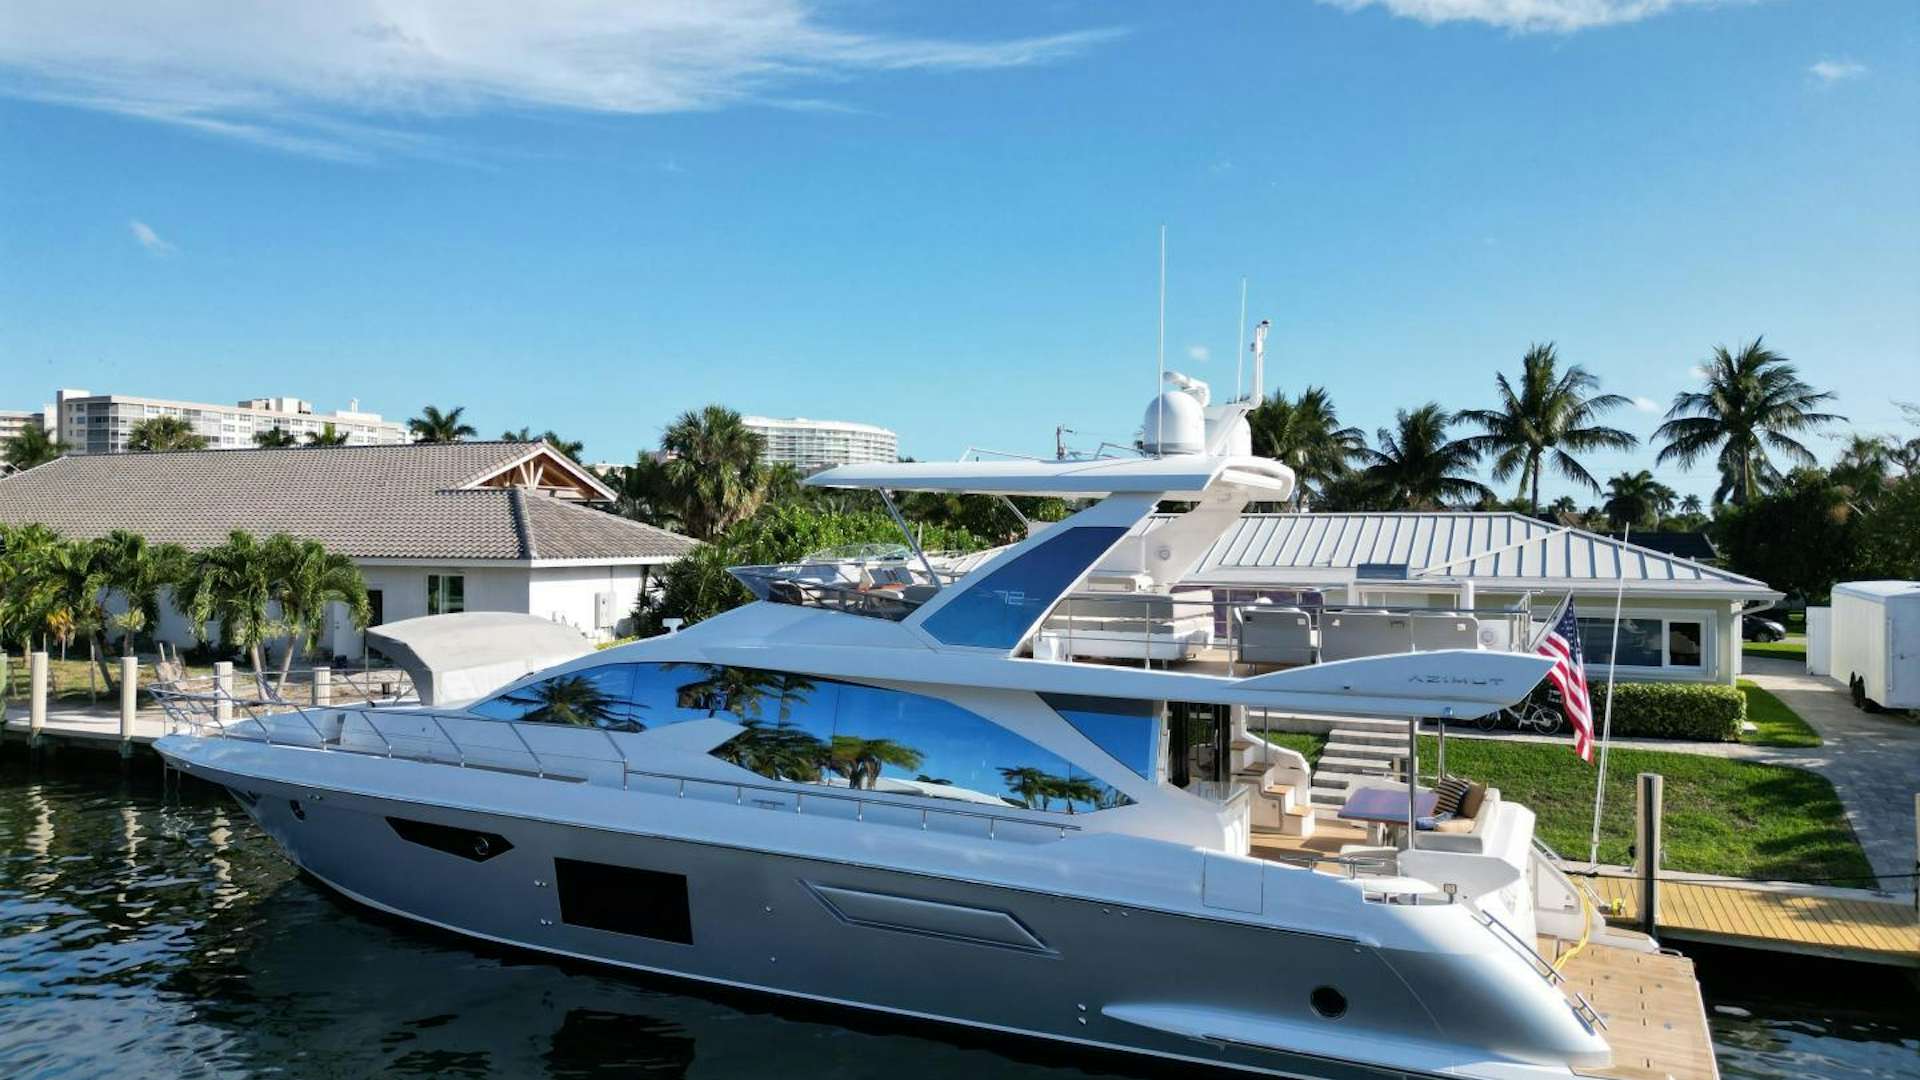 Velocity
Yacht for Sale